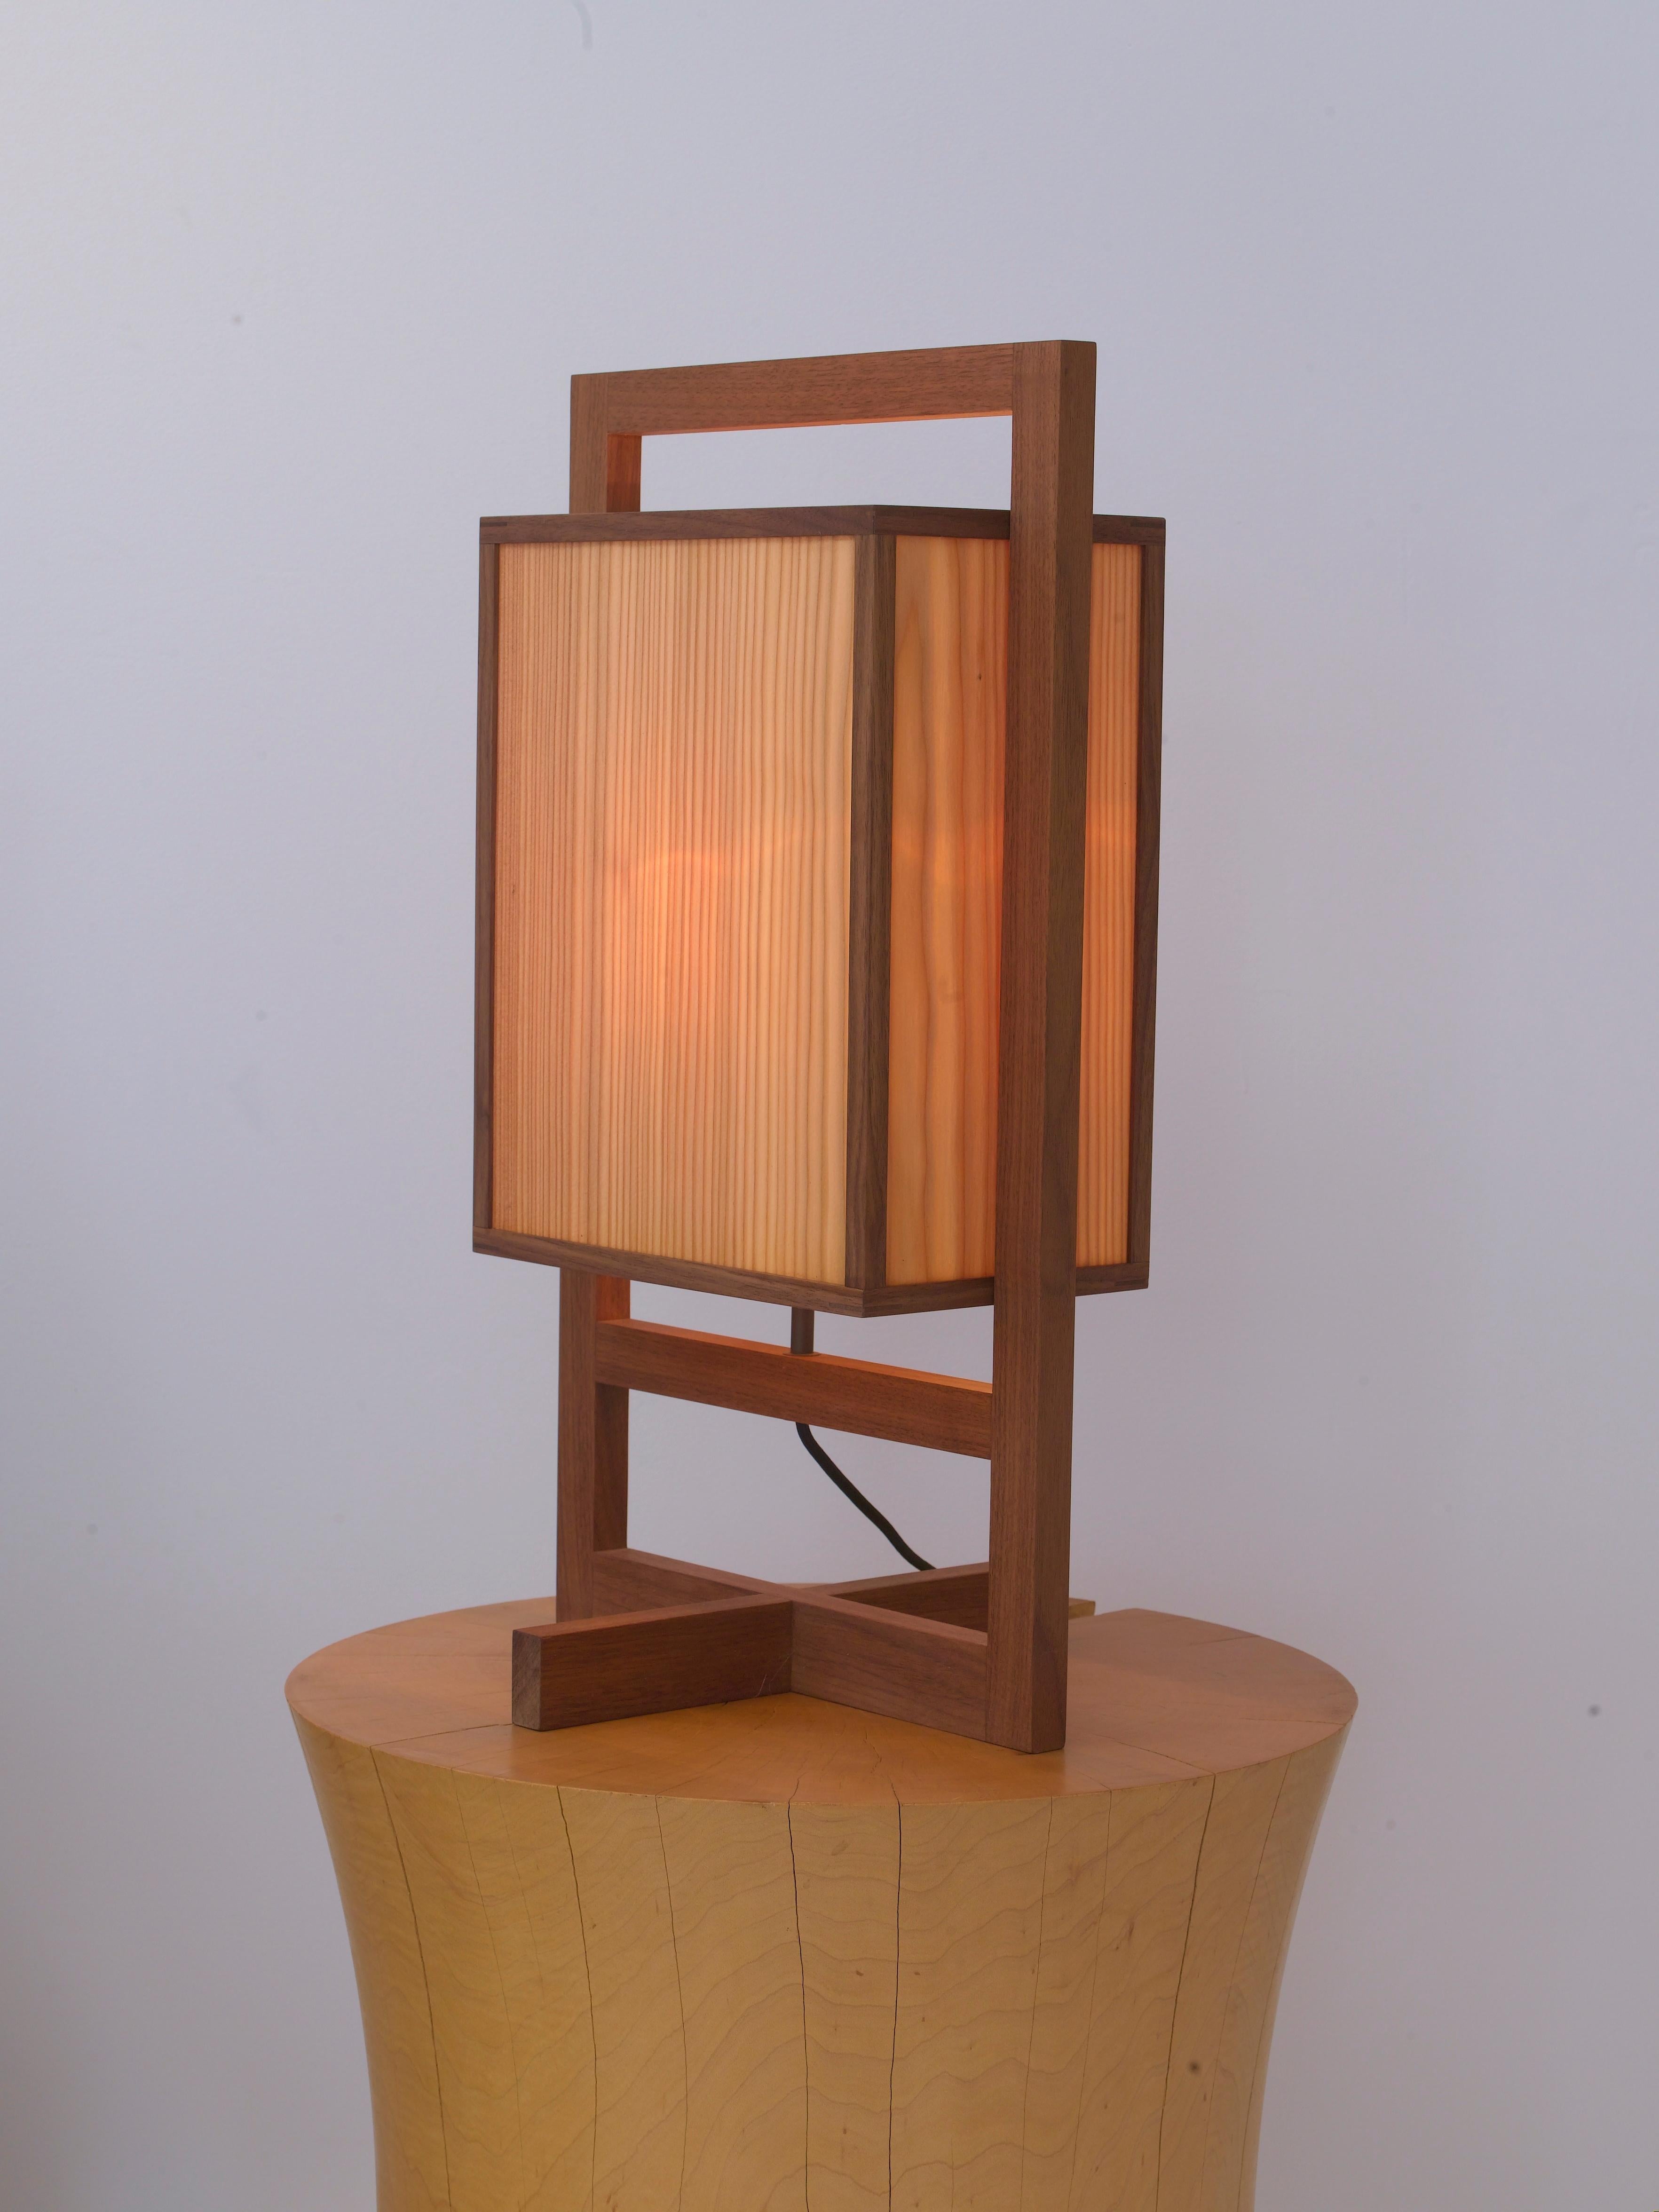 The small box lamp is one of a group of lamps designed by Chris Lehrecke in 2008. They were influenced by Japanese lanterns, as well as early Frank Lloyd Wright Designs. The lamps are beautifully crafted in Lehrecke's own studio with larch veneers